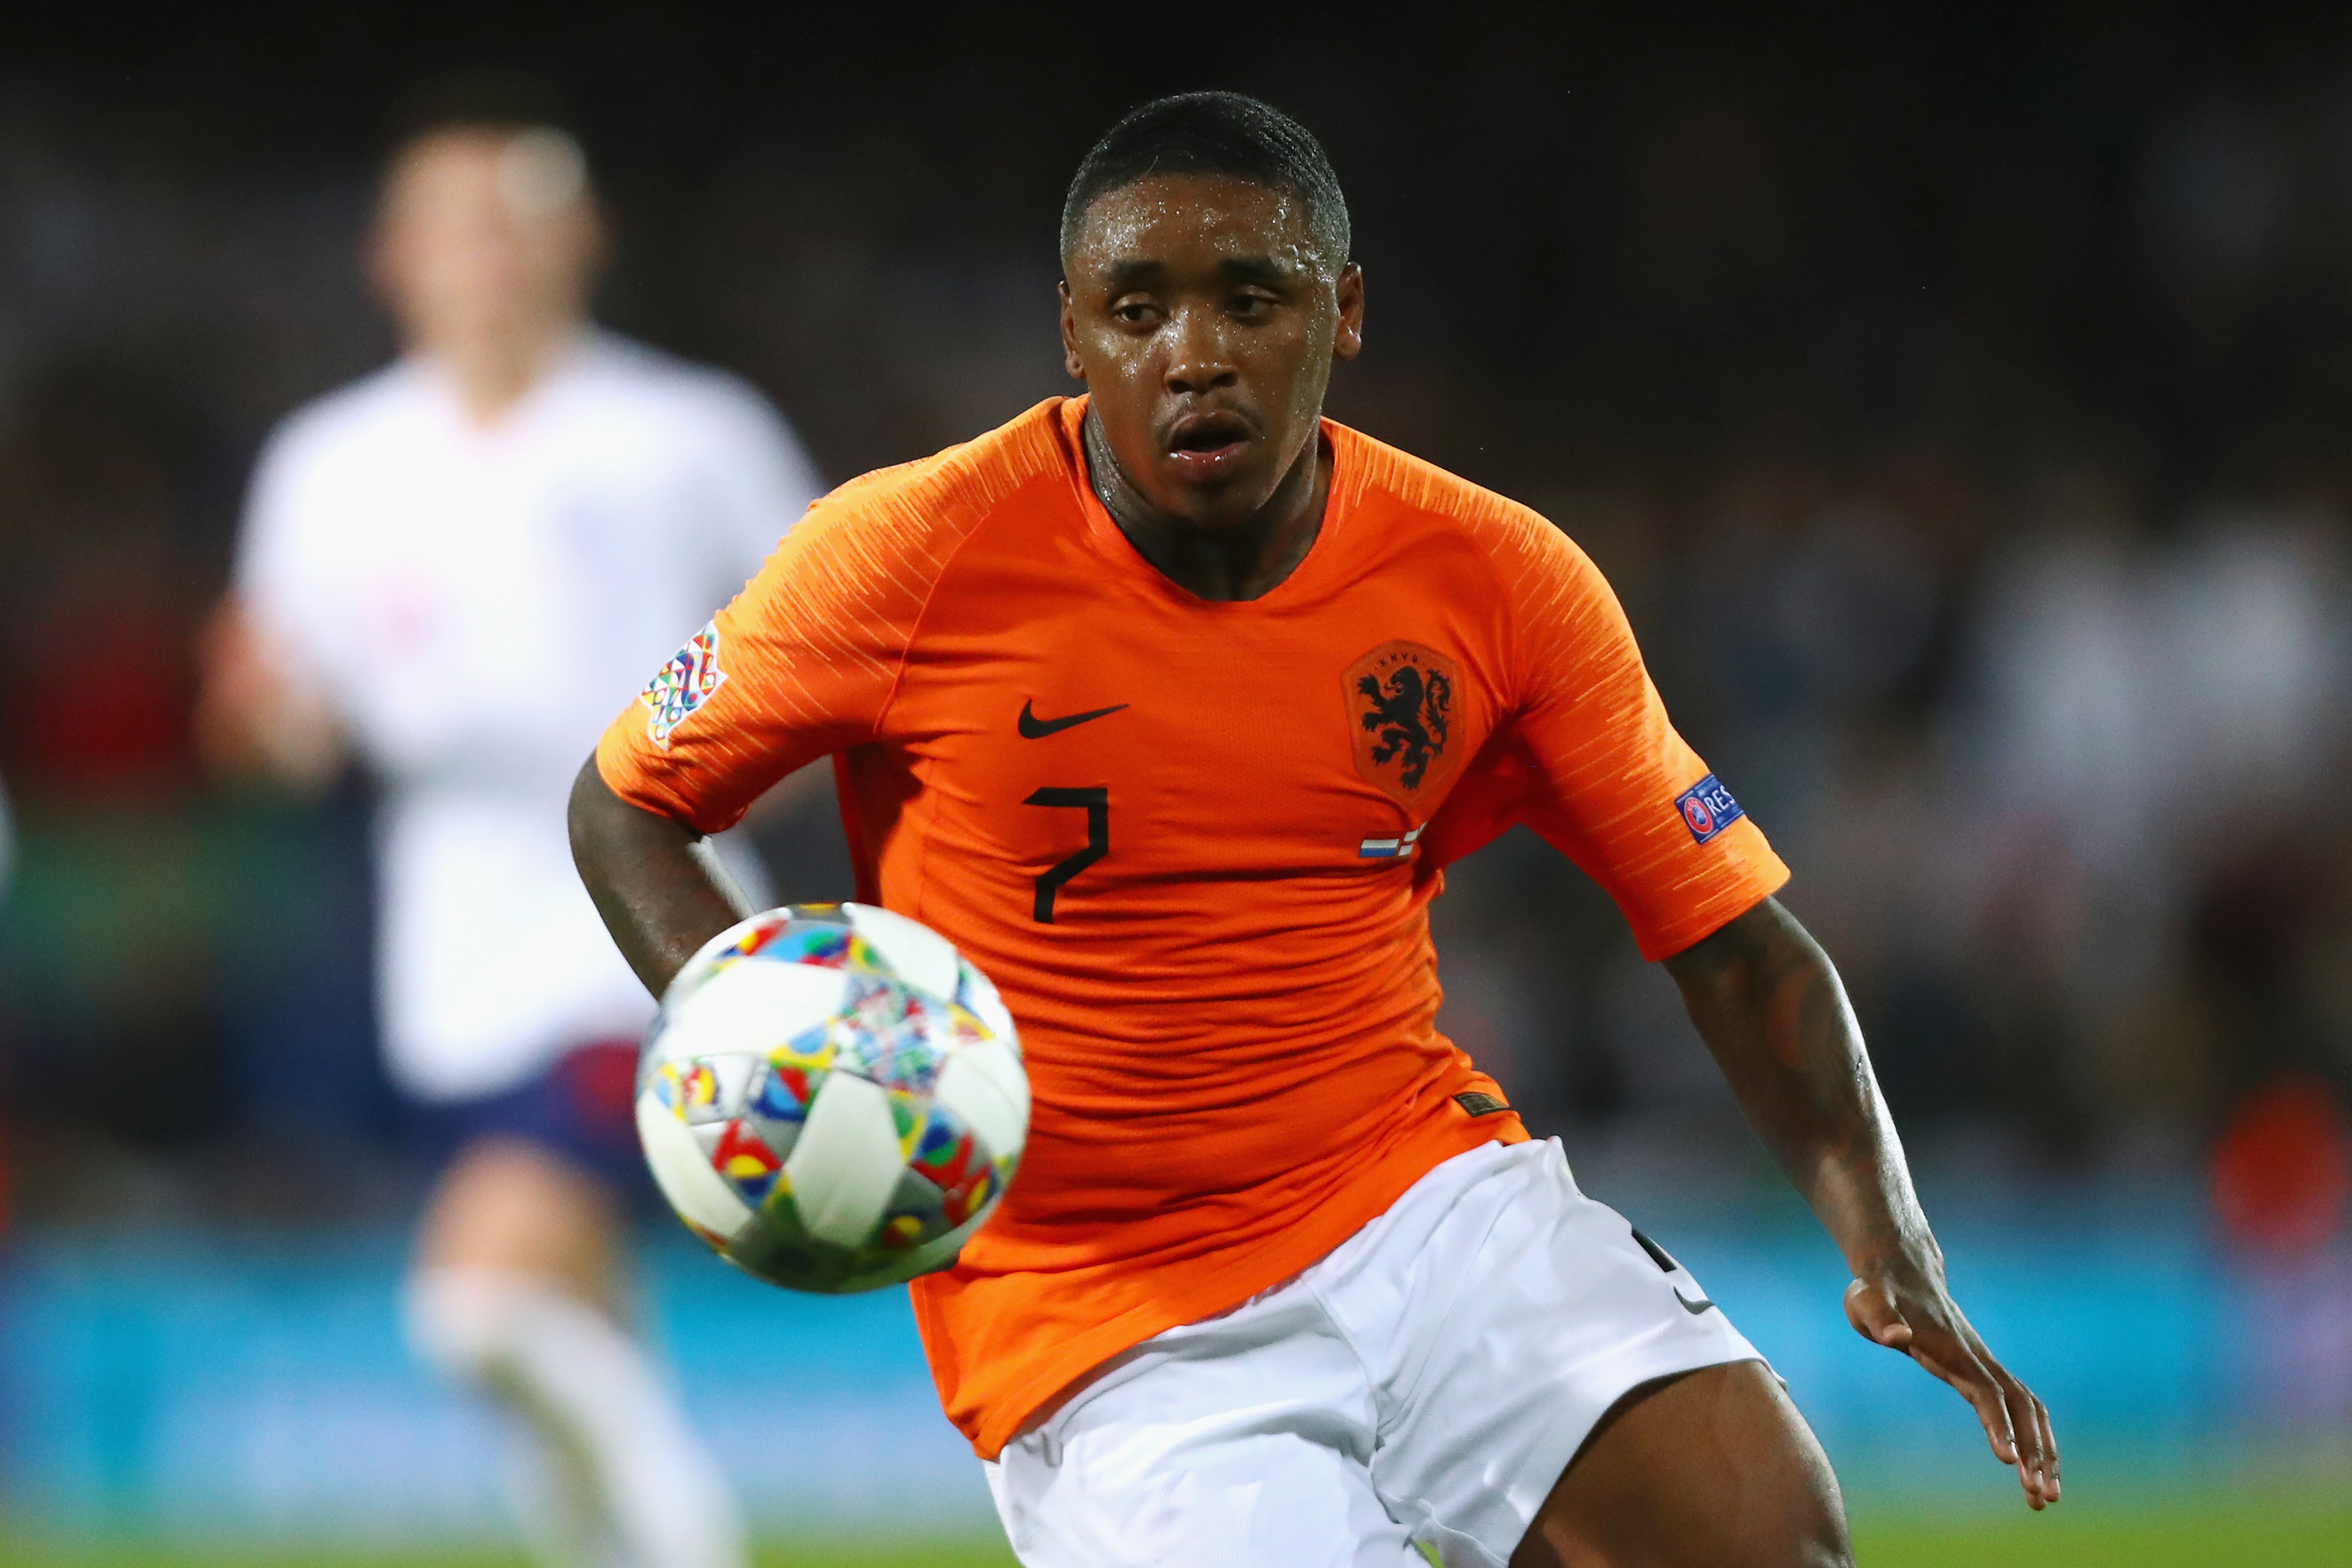 GUIMARAES, PORTUGAL - JUNE 06: Steven Bergwijn of The Netherlands in action during the UEFA Nations League Semi-Final match between the Netherlands and England at Estadio D. Afonso Henriques on June 06, 2019 in Guimaraes, Portugal. (Photo by Dean Mouhtaropoulos/Getty Images)